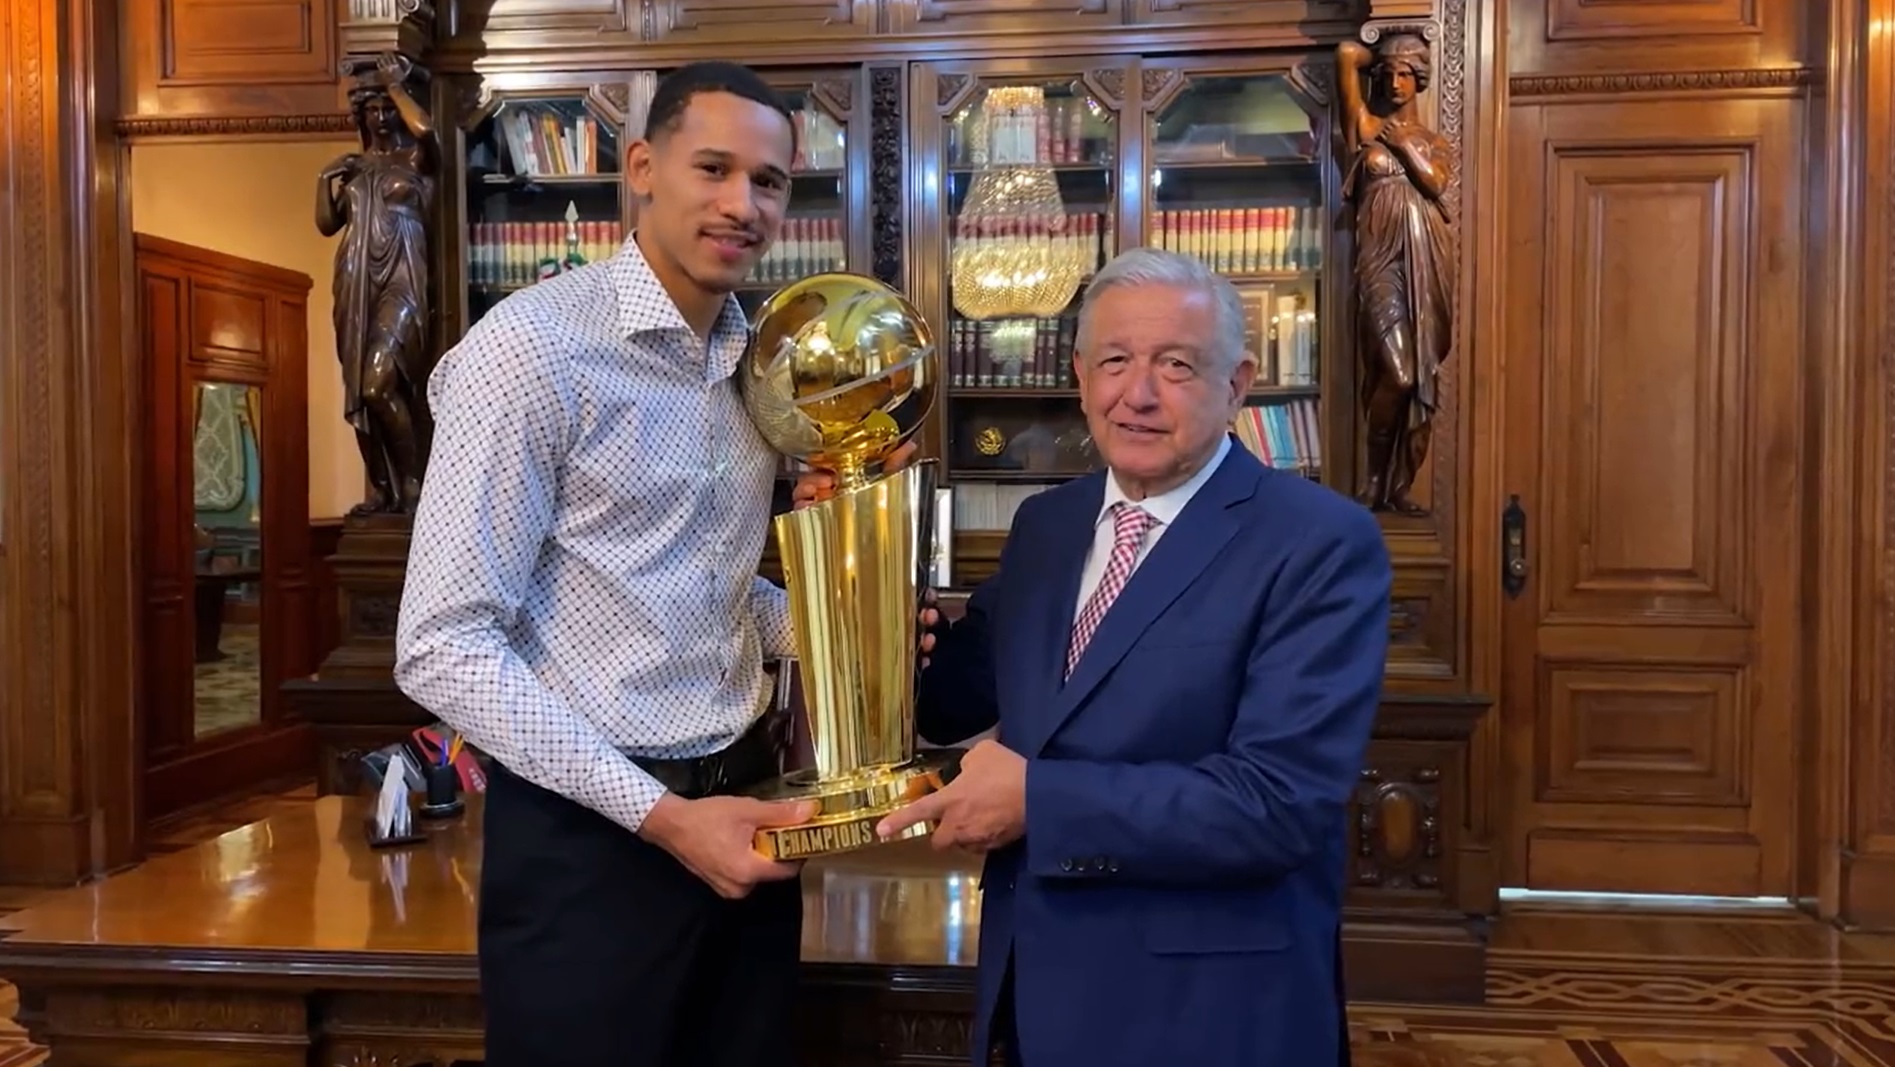 Juan Toscano visited AMLO at the National Palace after being NBA champion (Photo: Twitter/@lopezobrador_)